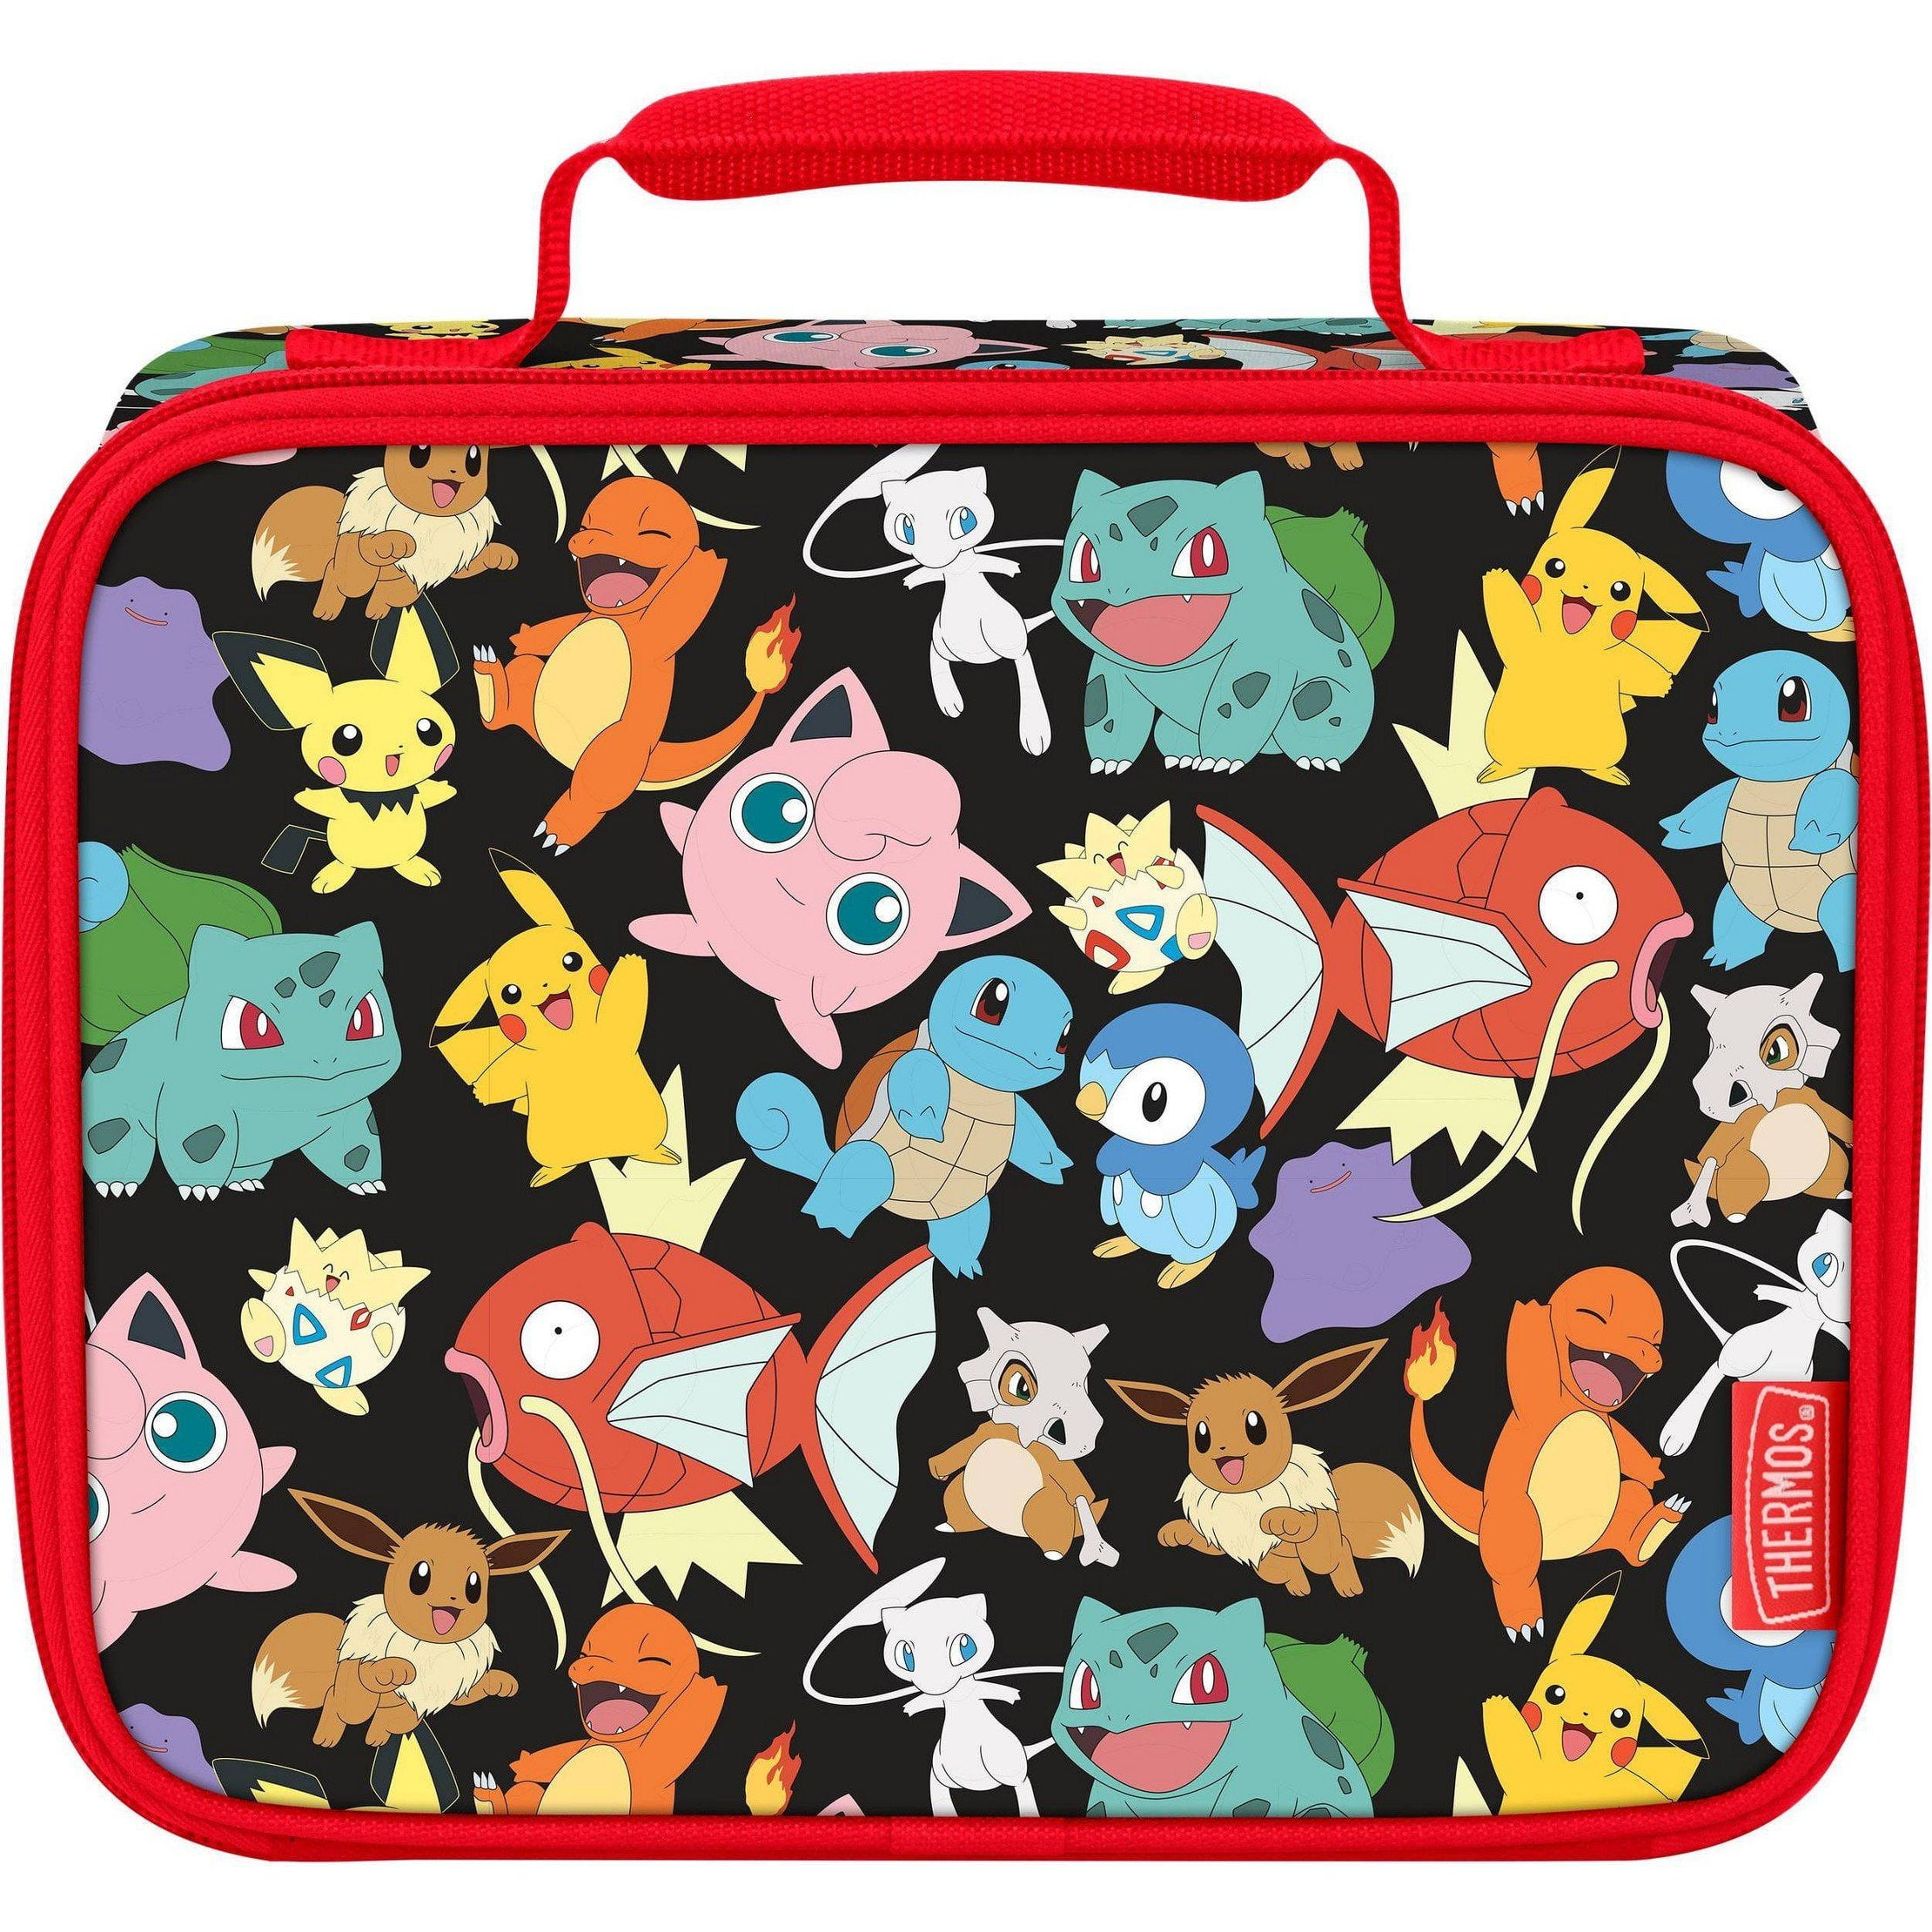 Thermos, Pokemon Soft Lunch Kit, One Size (K219032006)